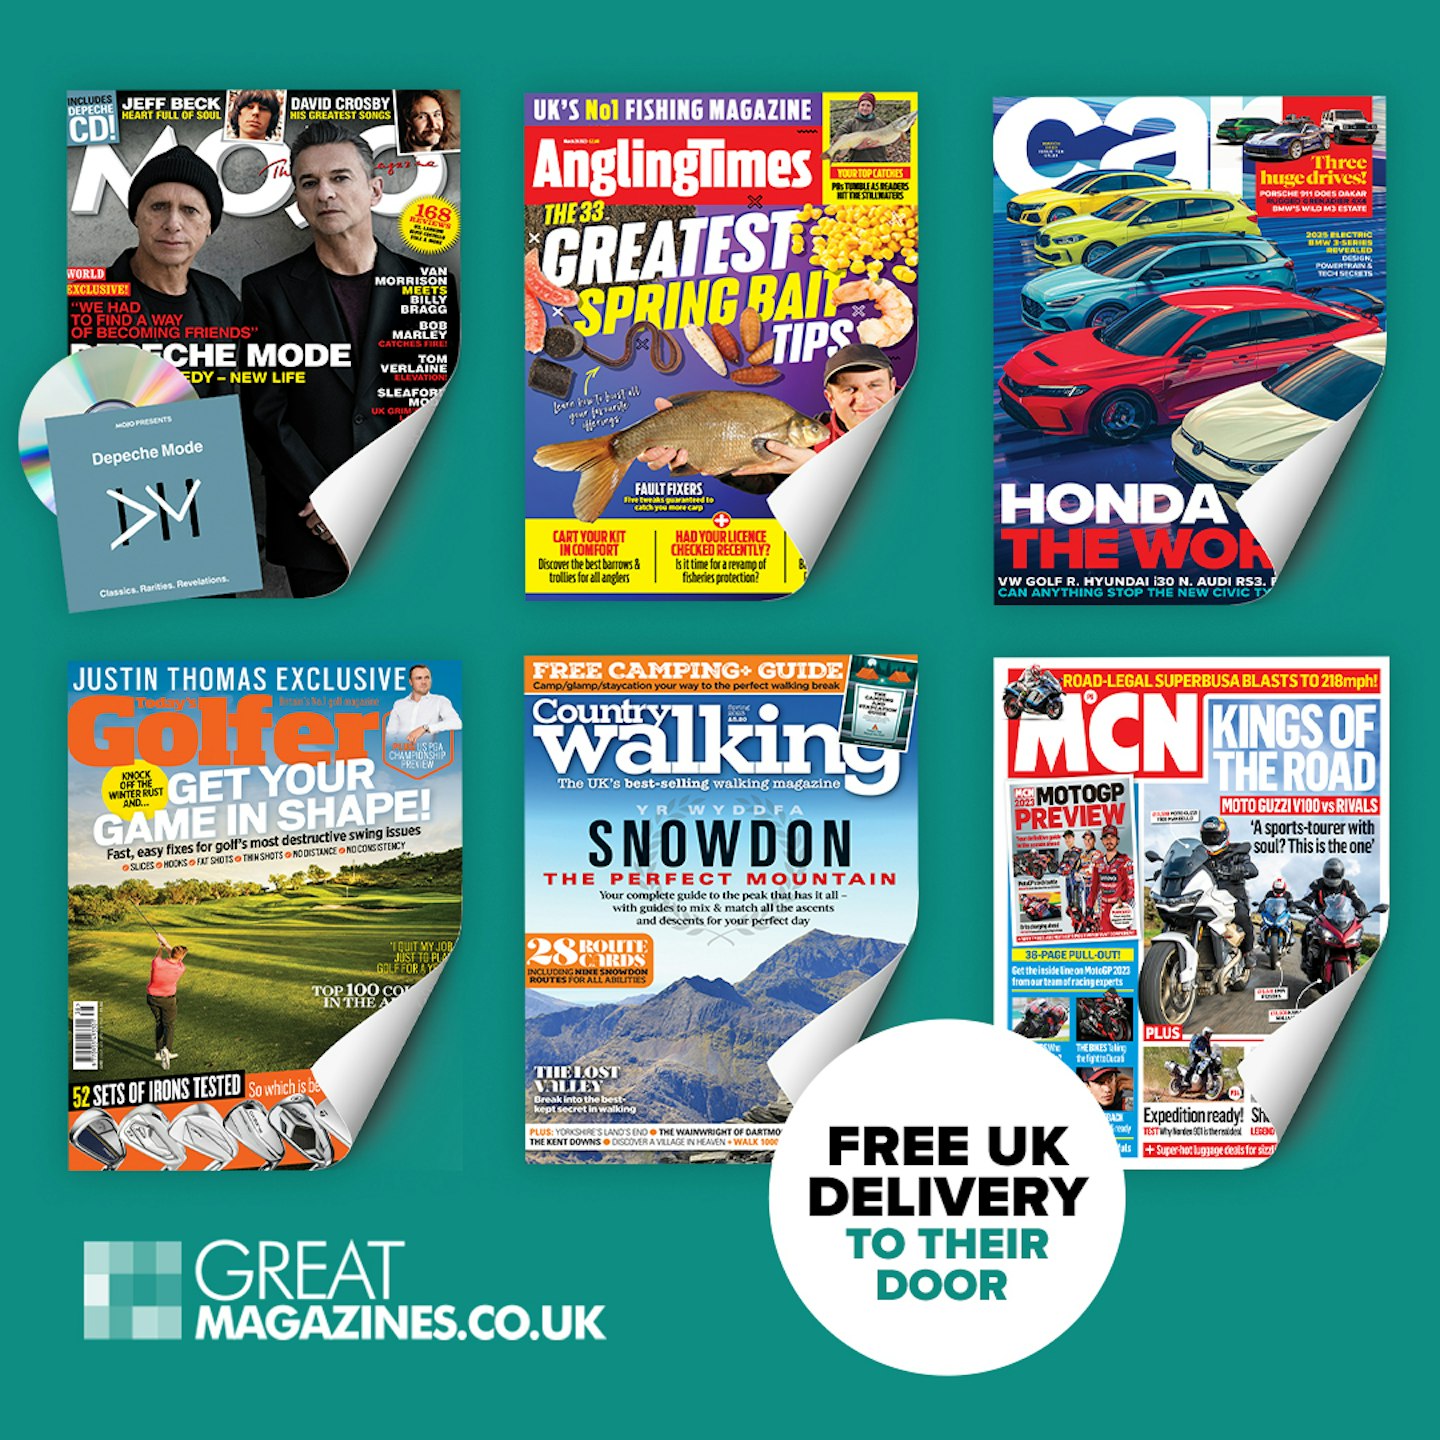 Magazine Subscriptions from just £14.99